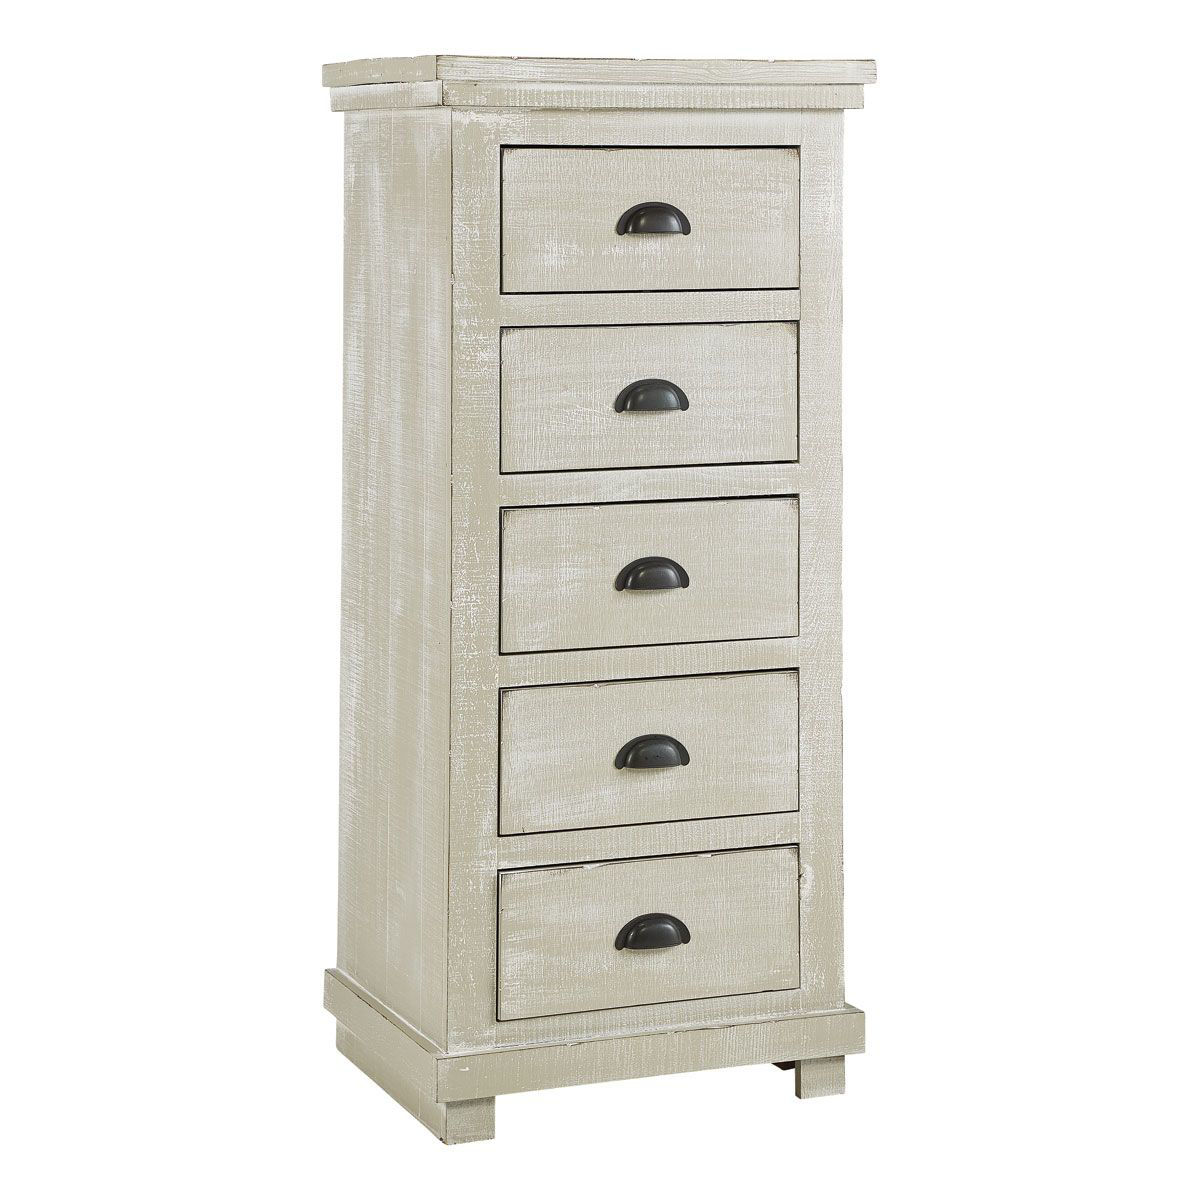 Homestead Dove Grey Lingerie Chest Badcock Home Furniture More